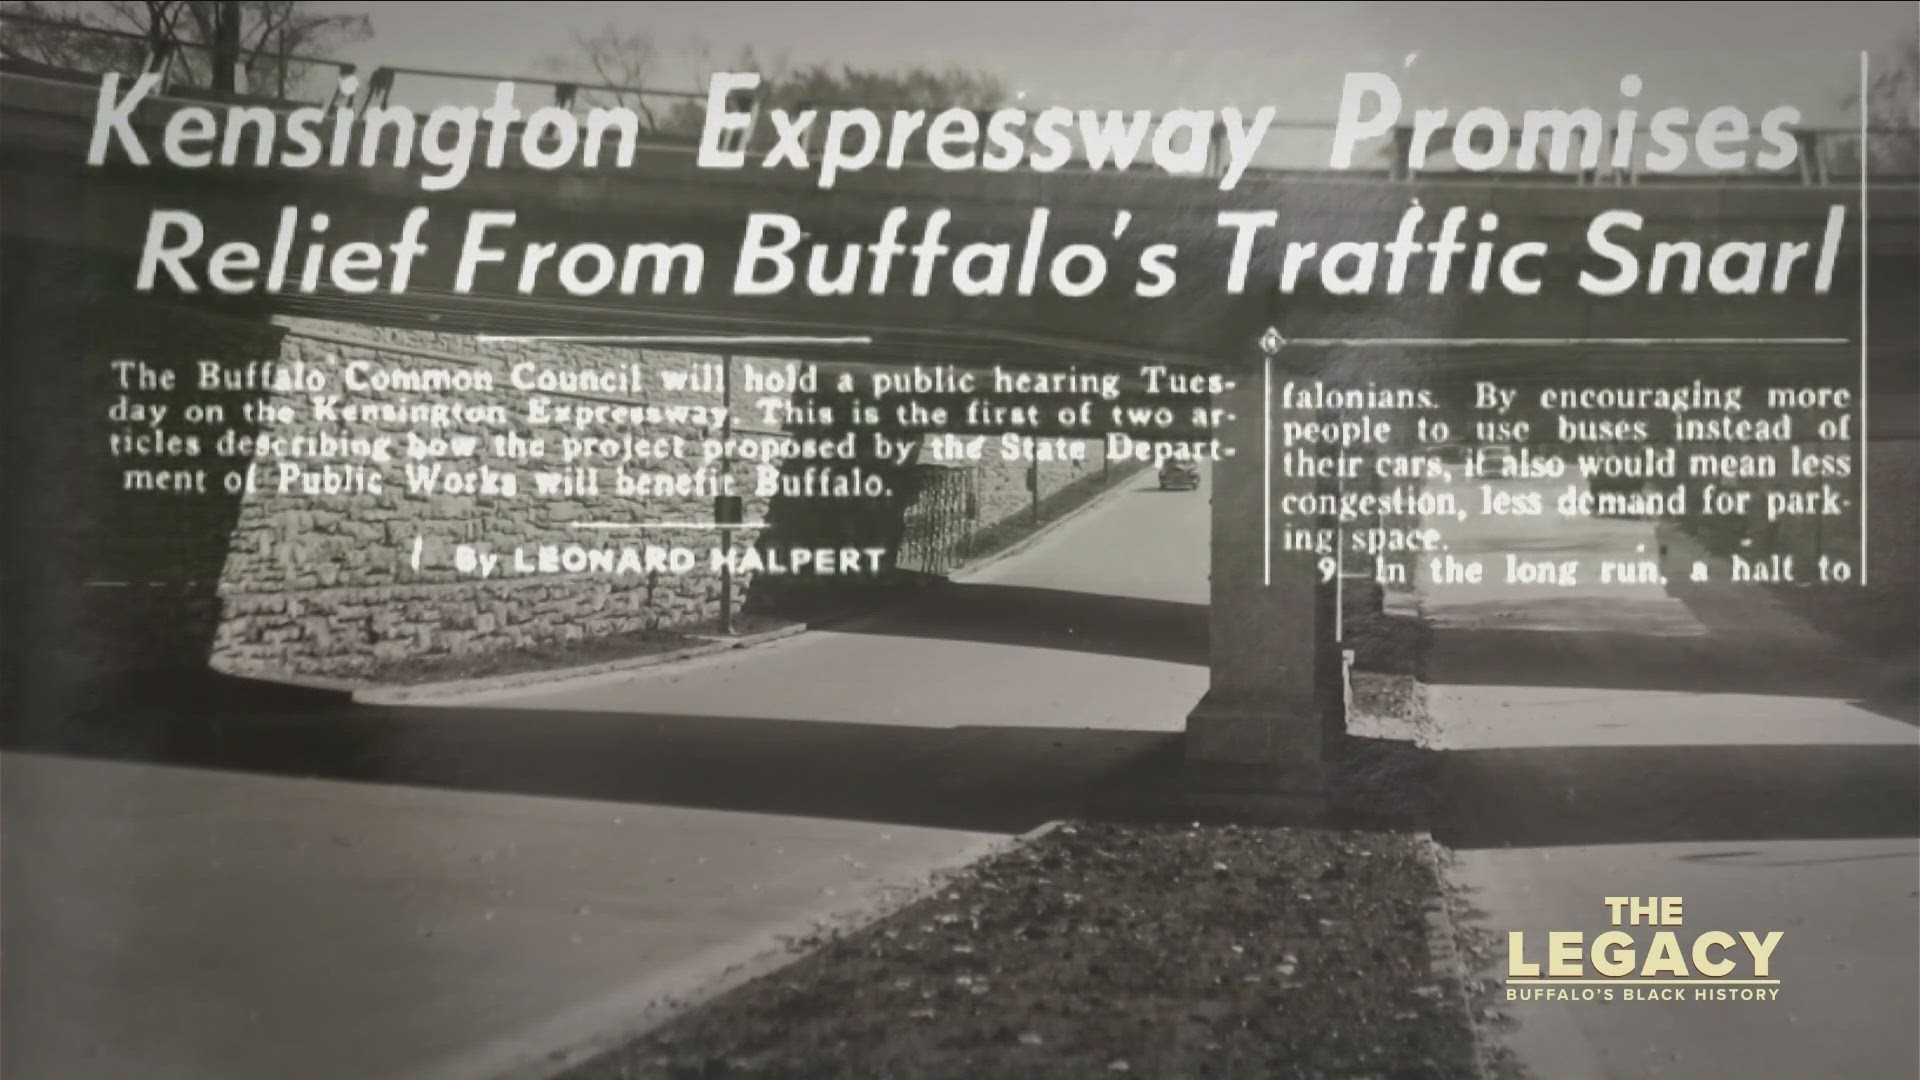 We look back at the Kensington Expressway before it was built and reflect on the community it divided.